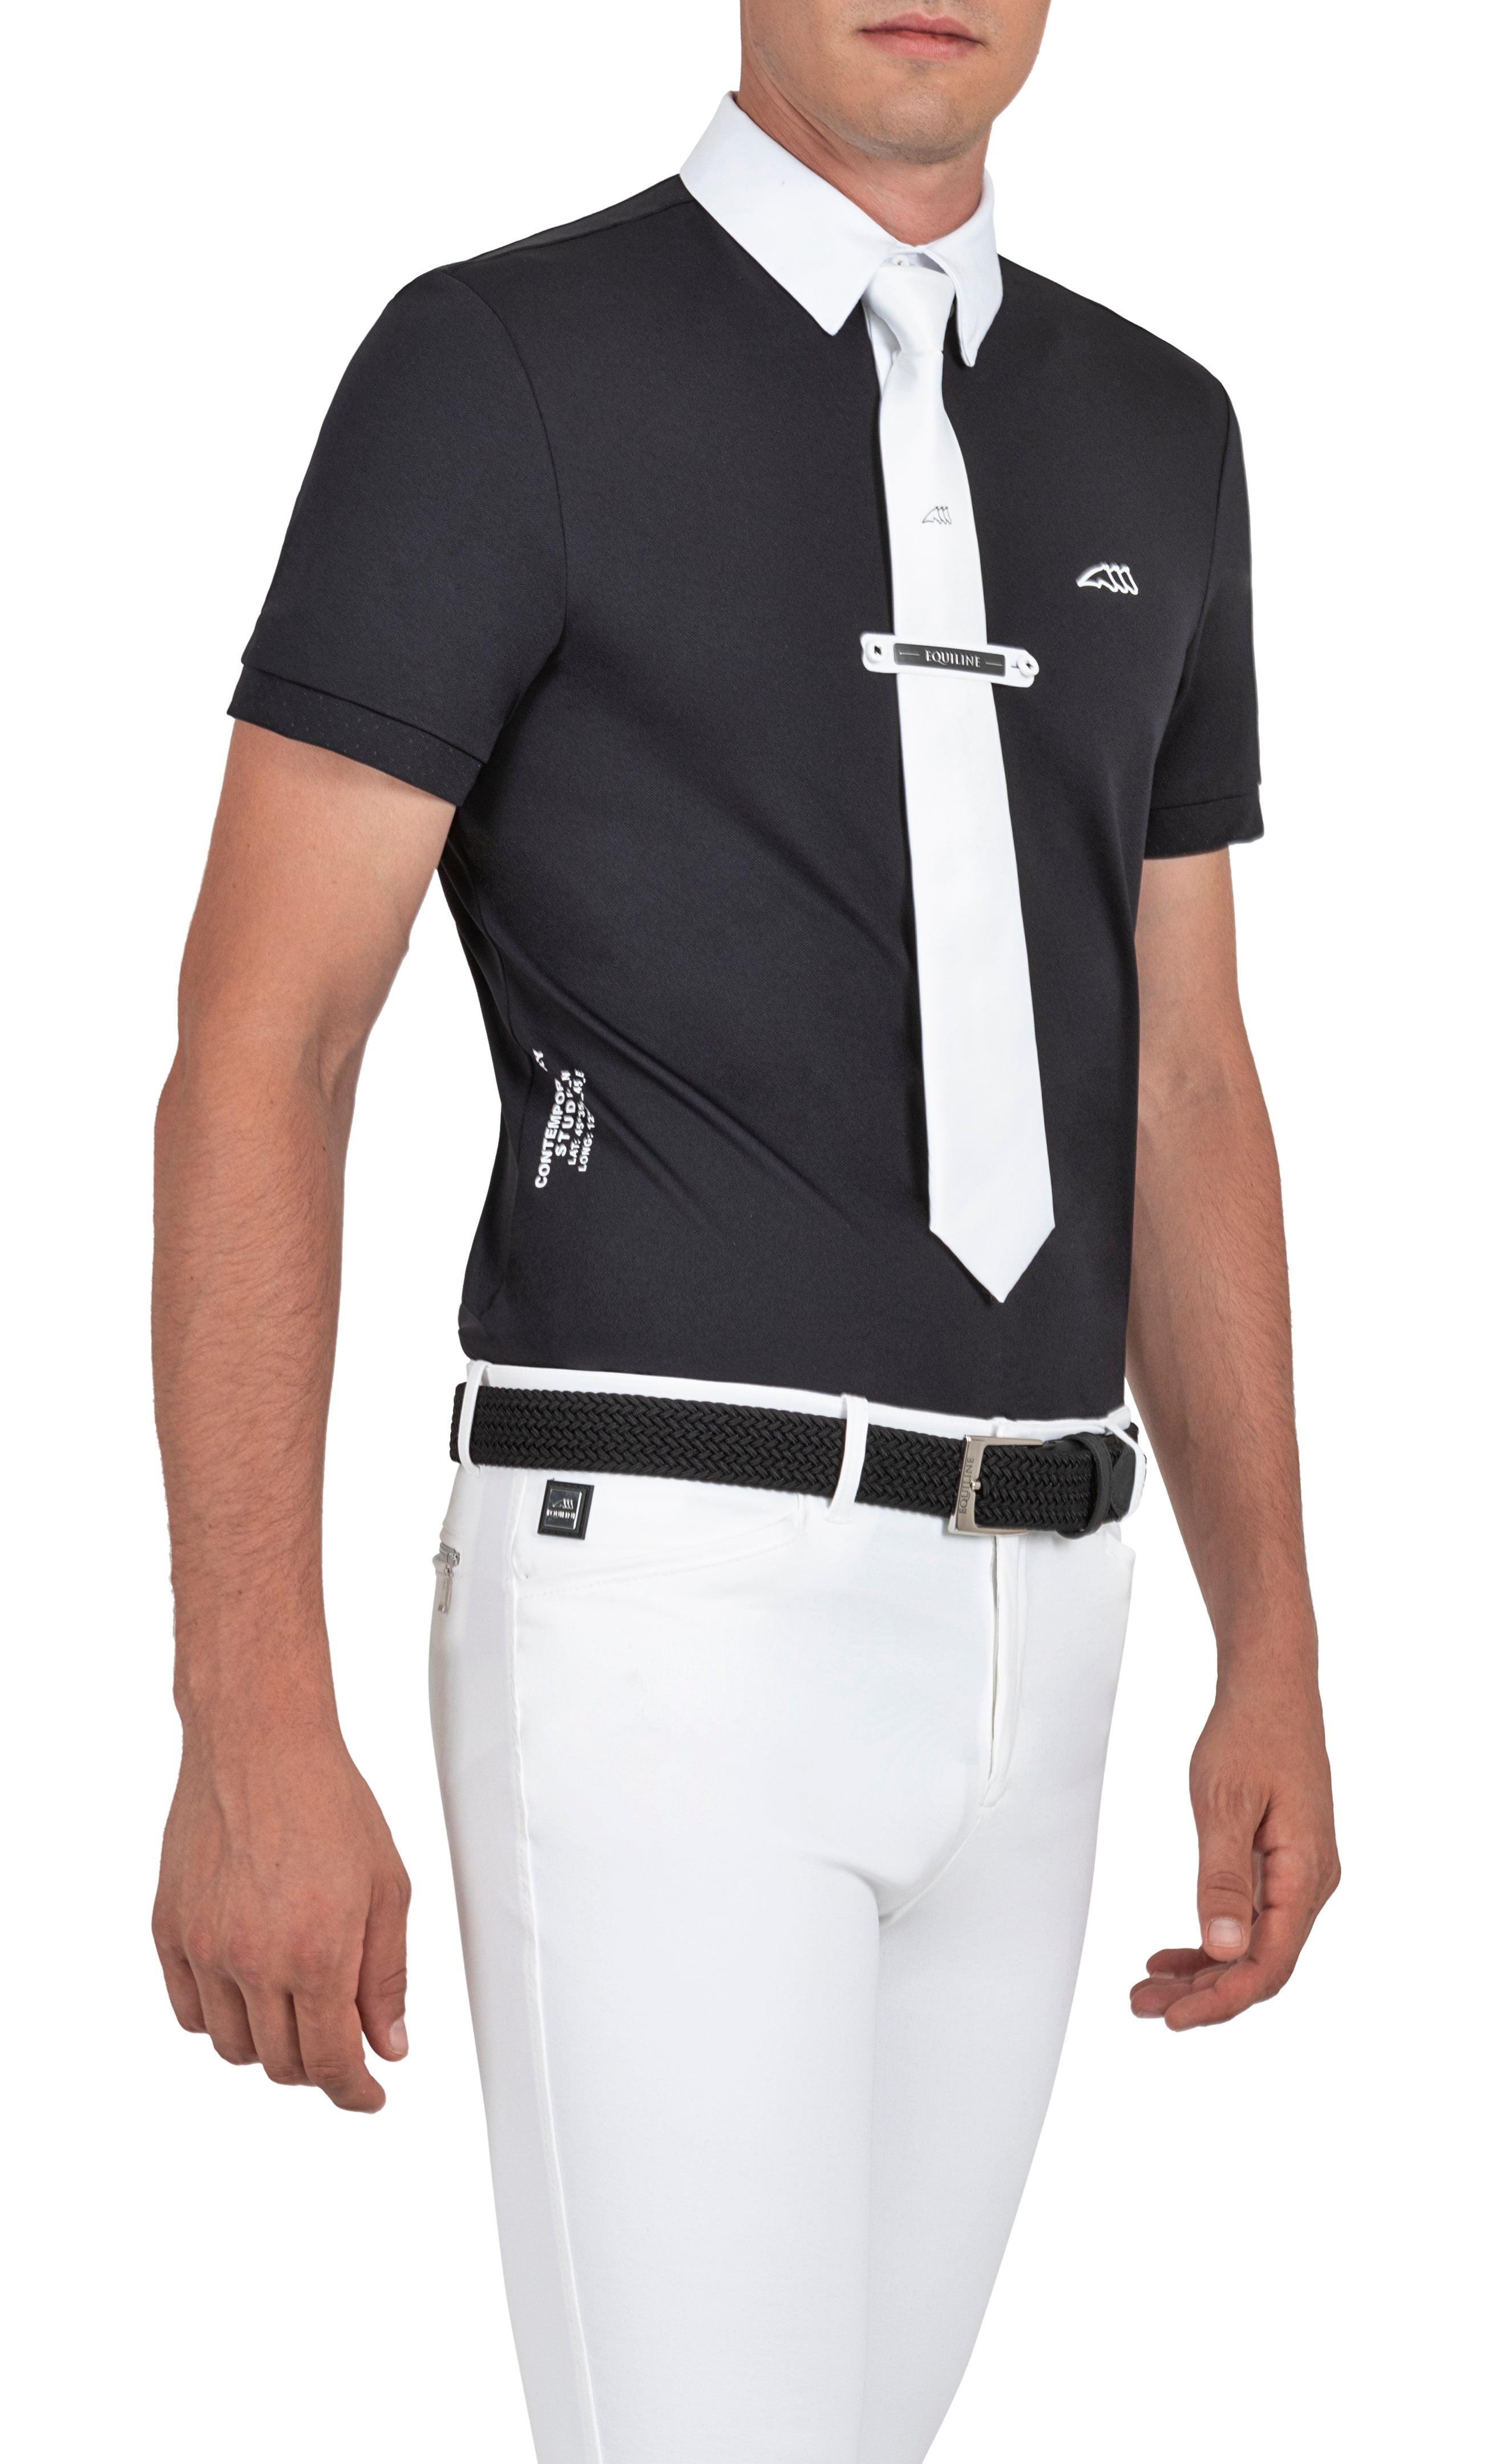 Equiline Celicec Men's Competition Polo Shirt